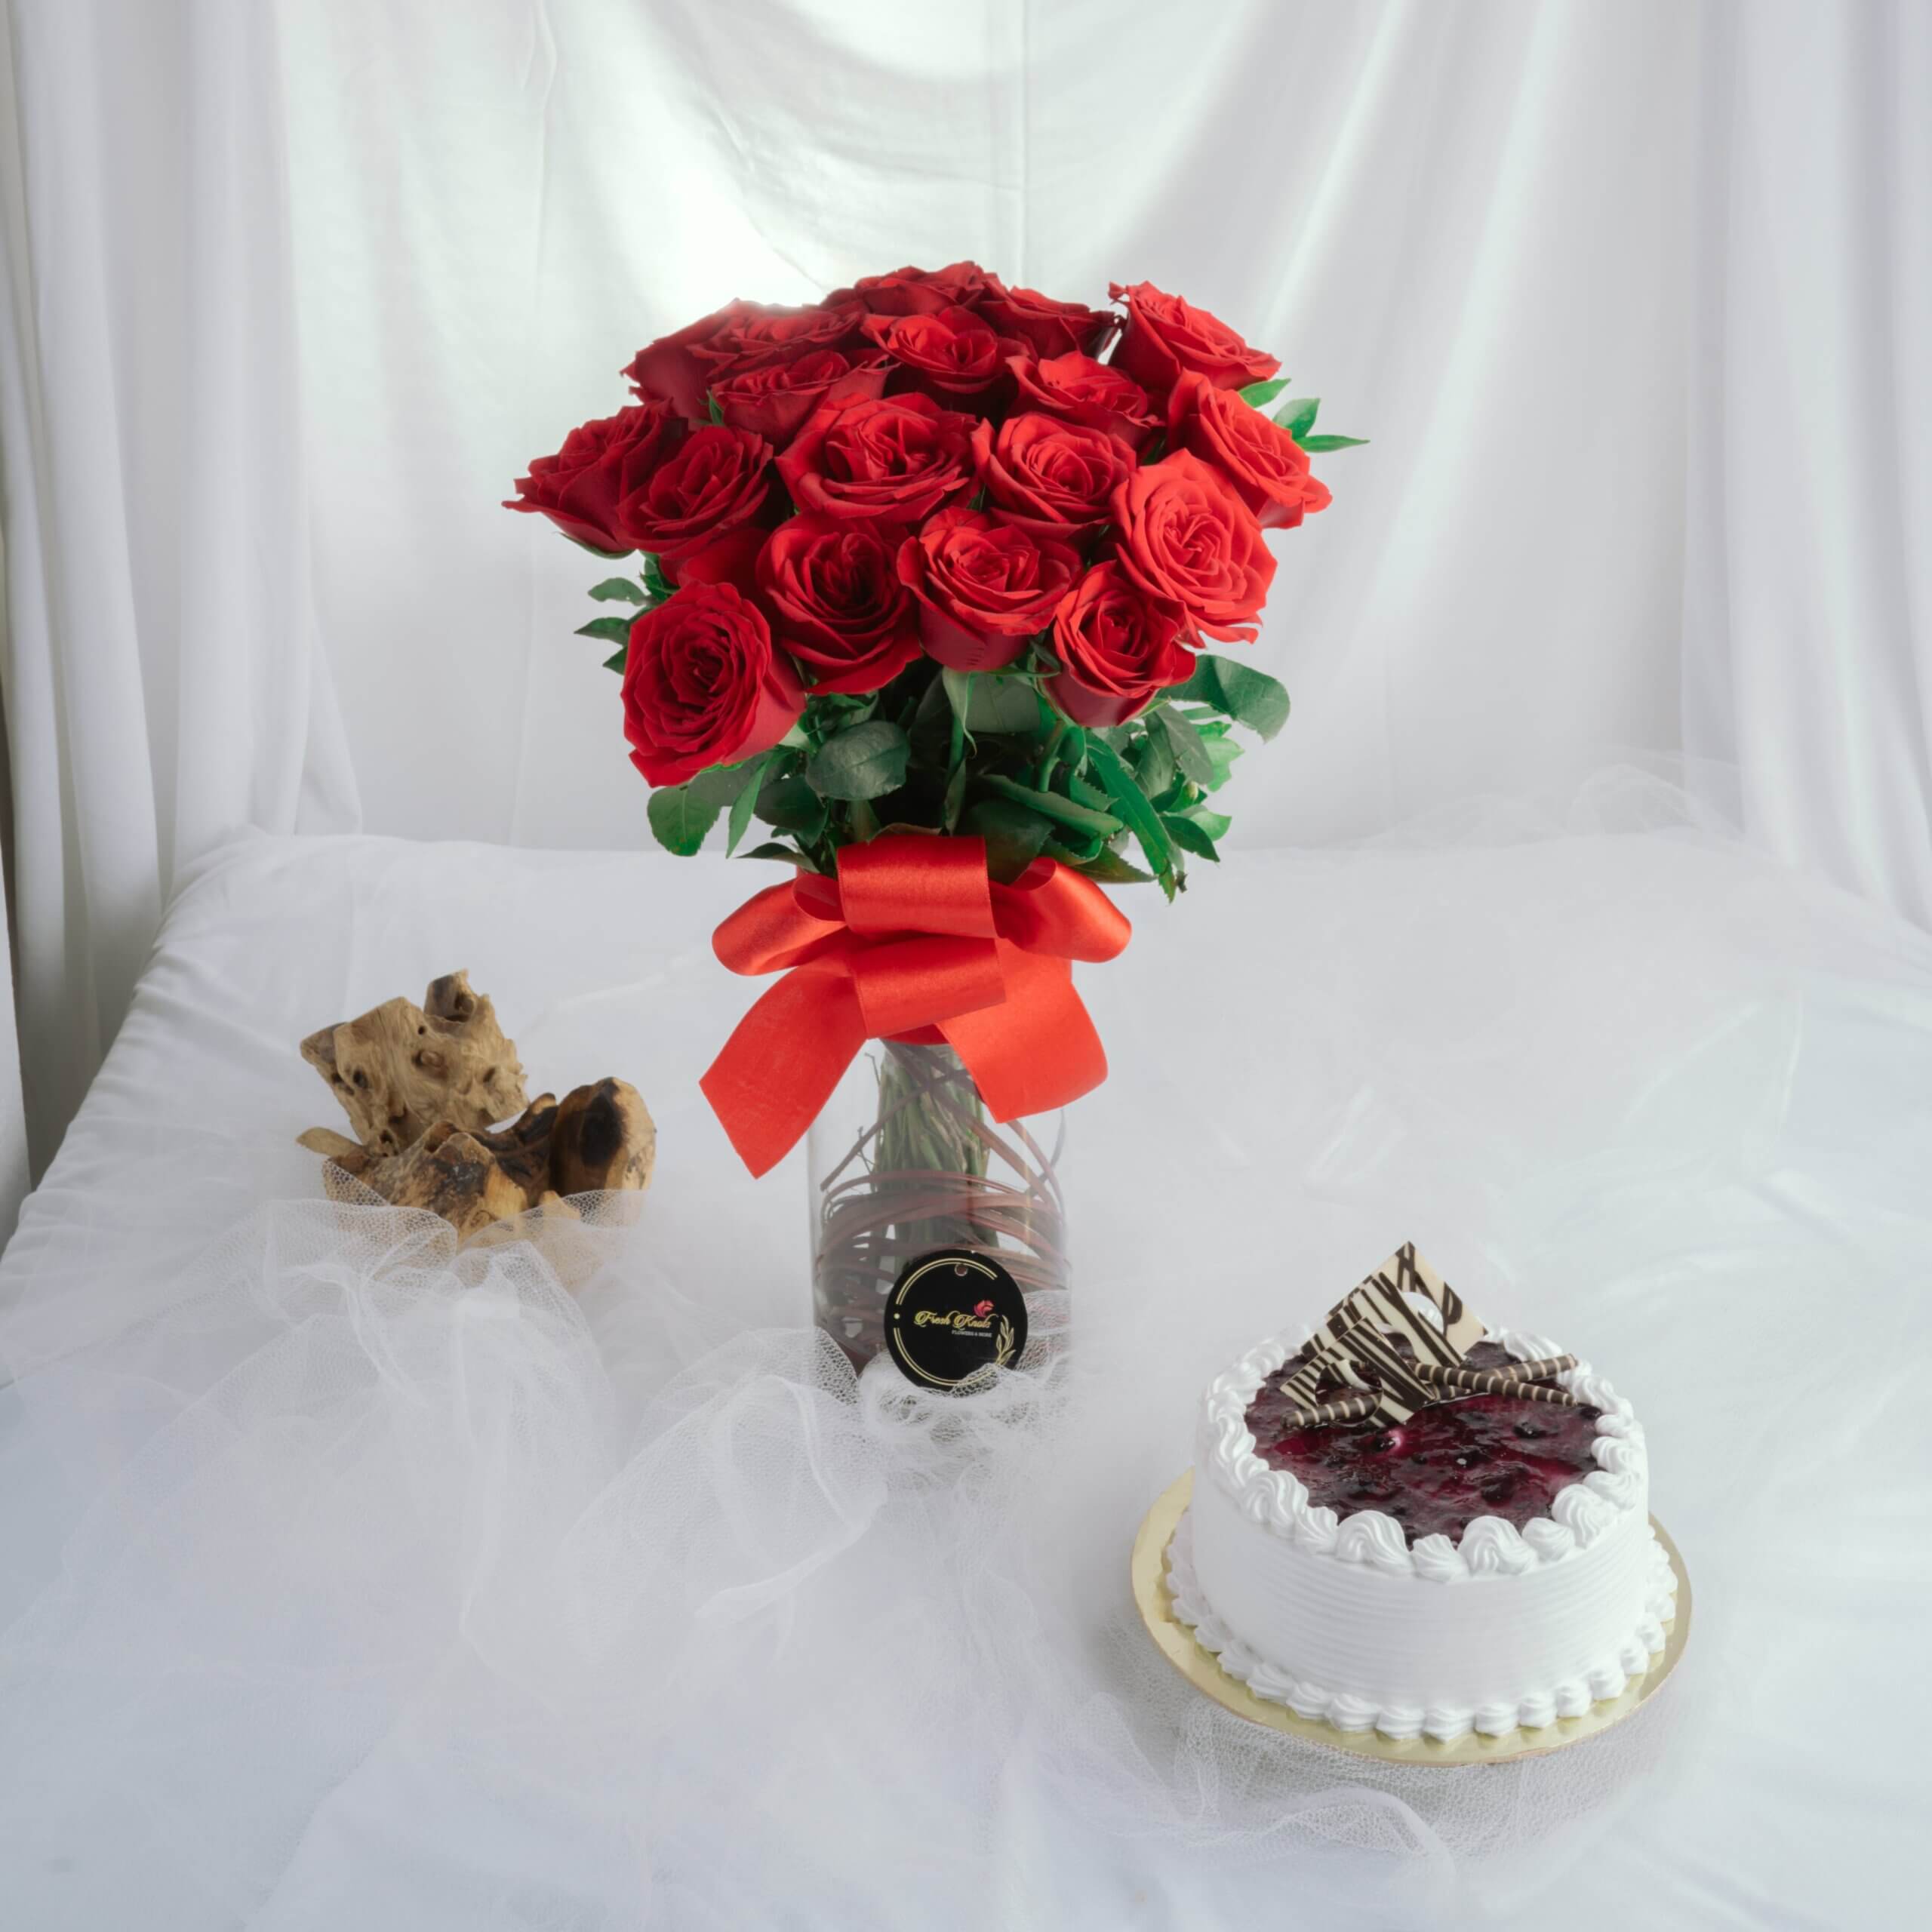 Combo-Roses-In-A-Vase-Cake-1